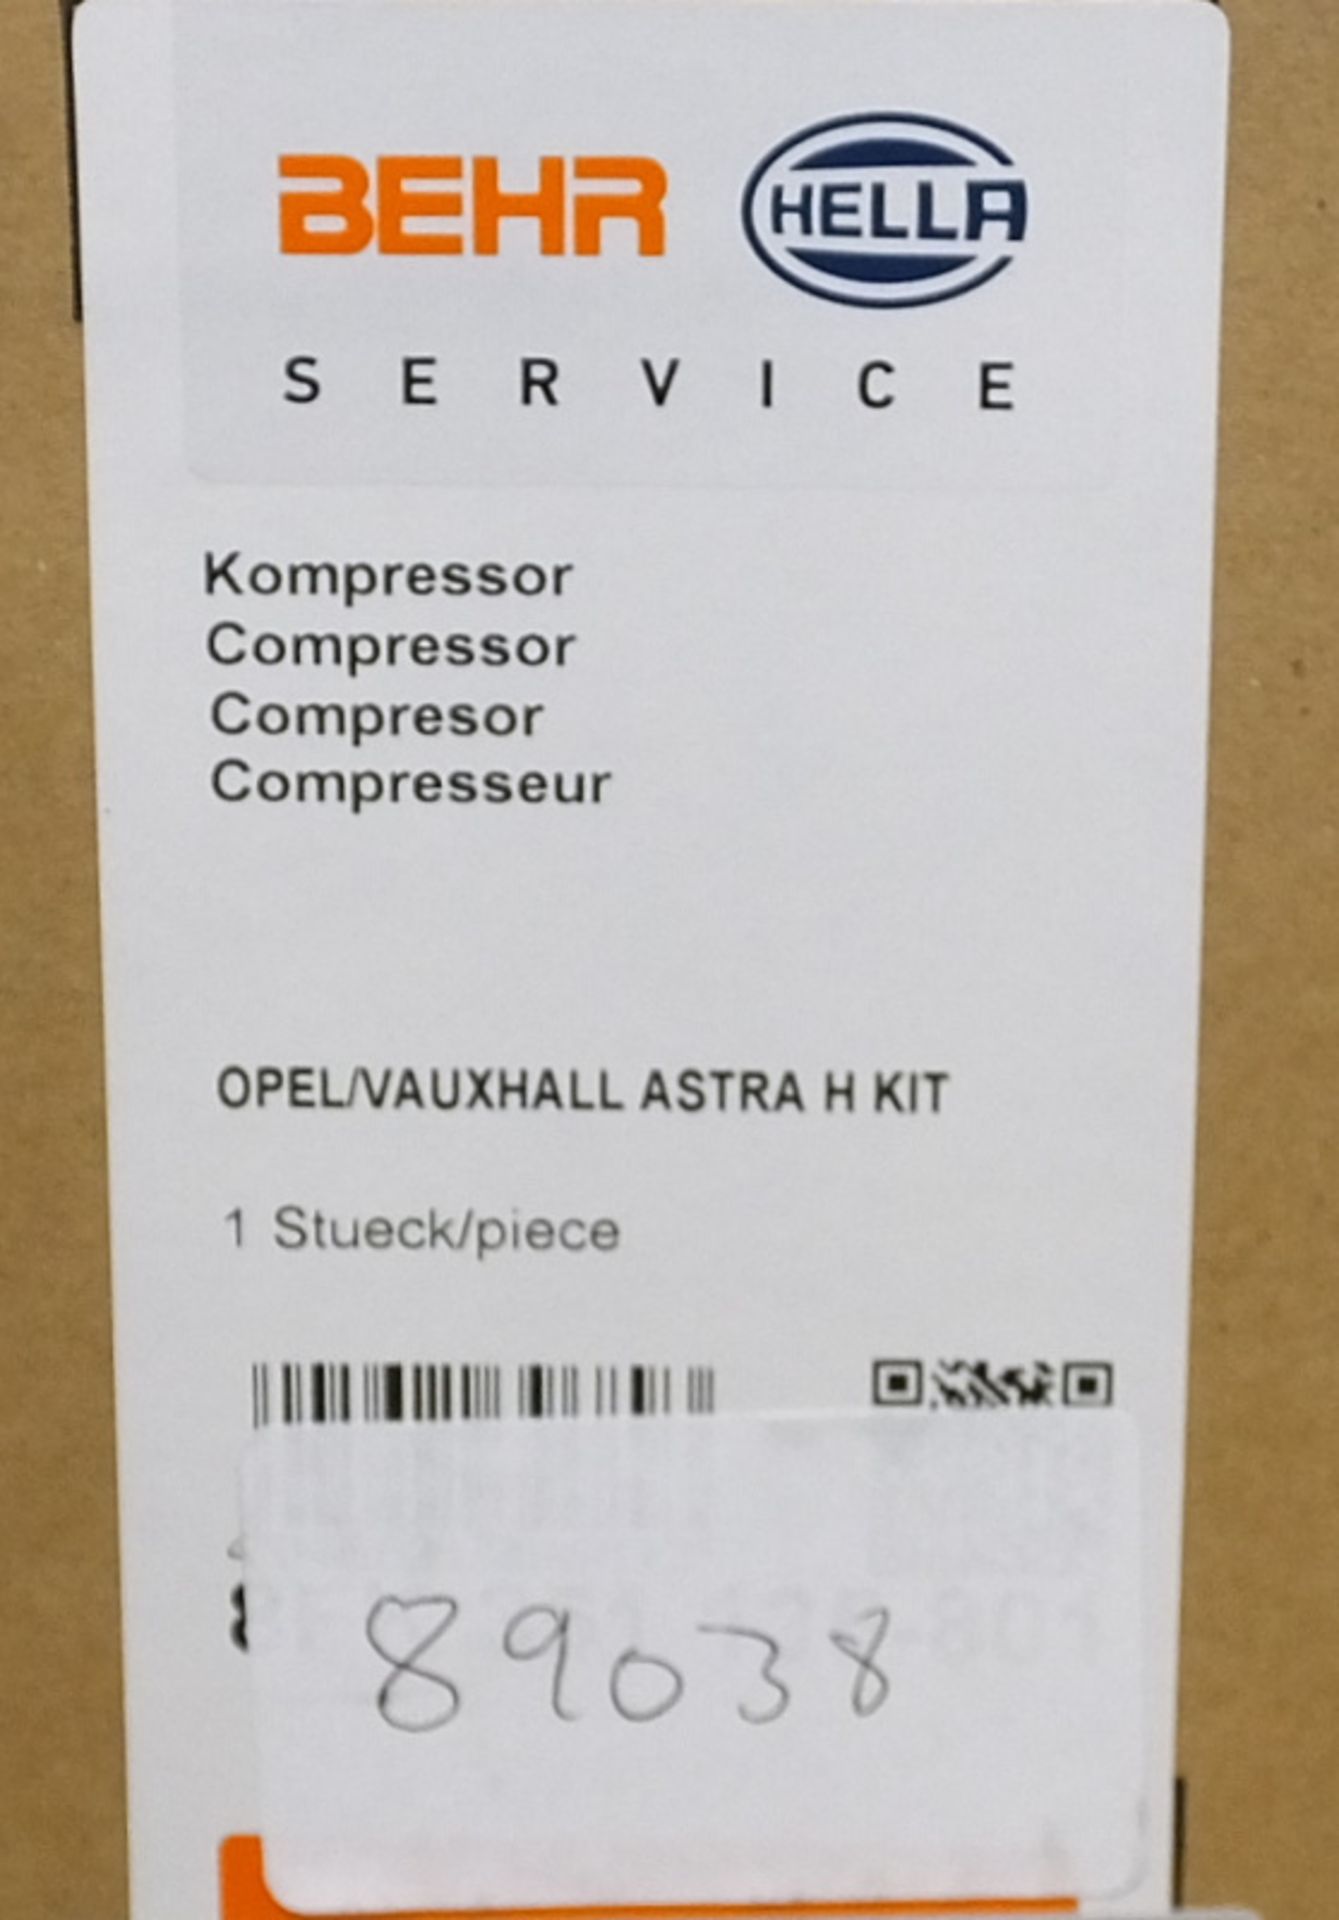 Behr Hella compressor for Opel/Vauxhall Astra H Kit - model 8FK 351 135801 - Image 2 of 2